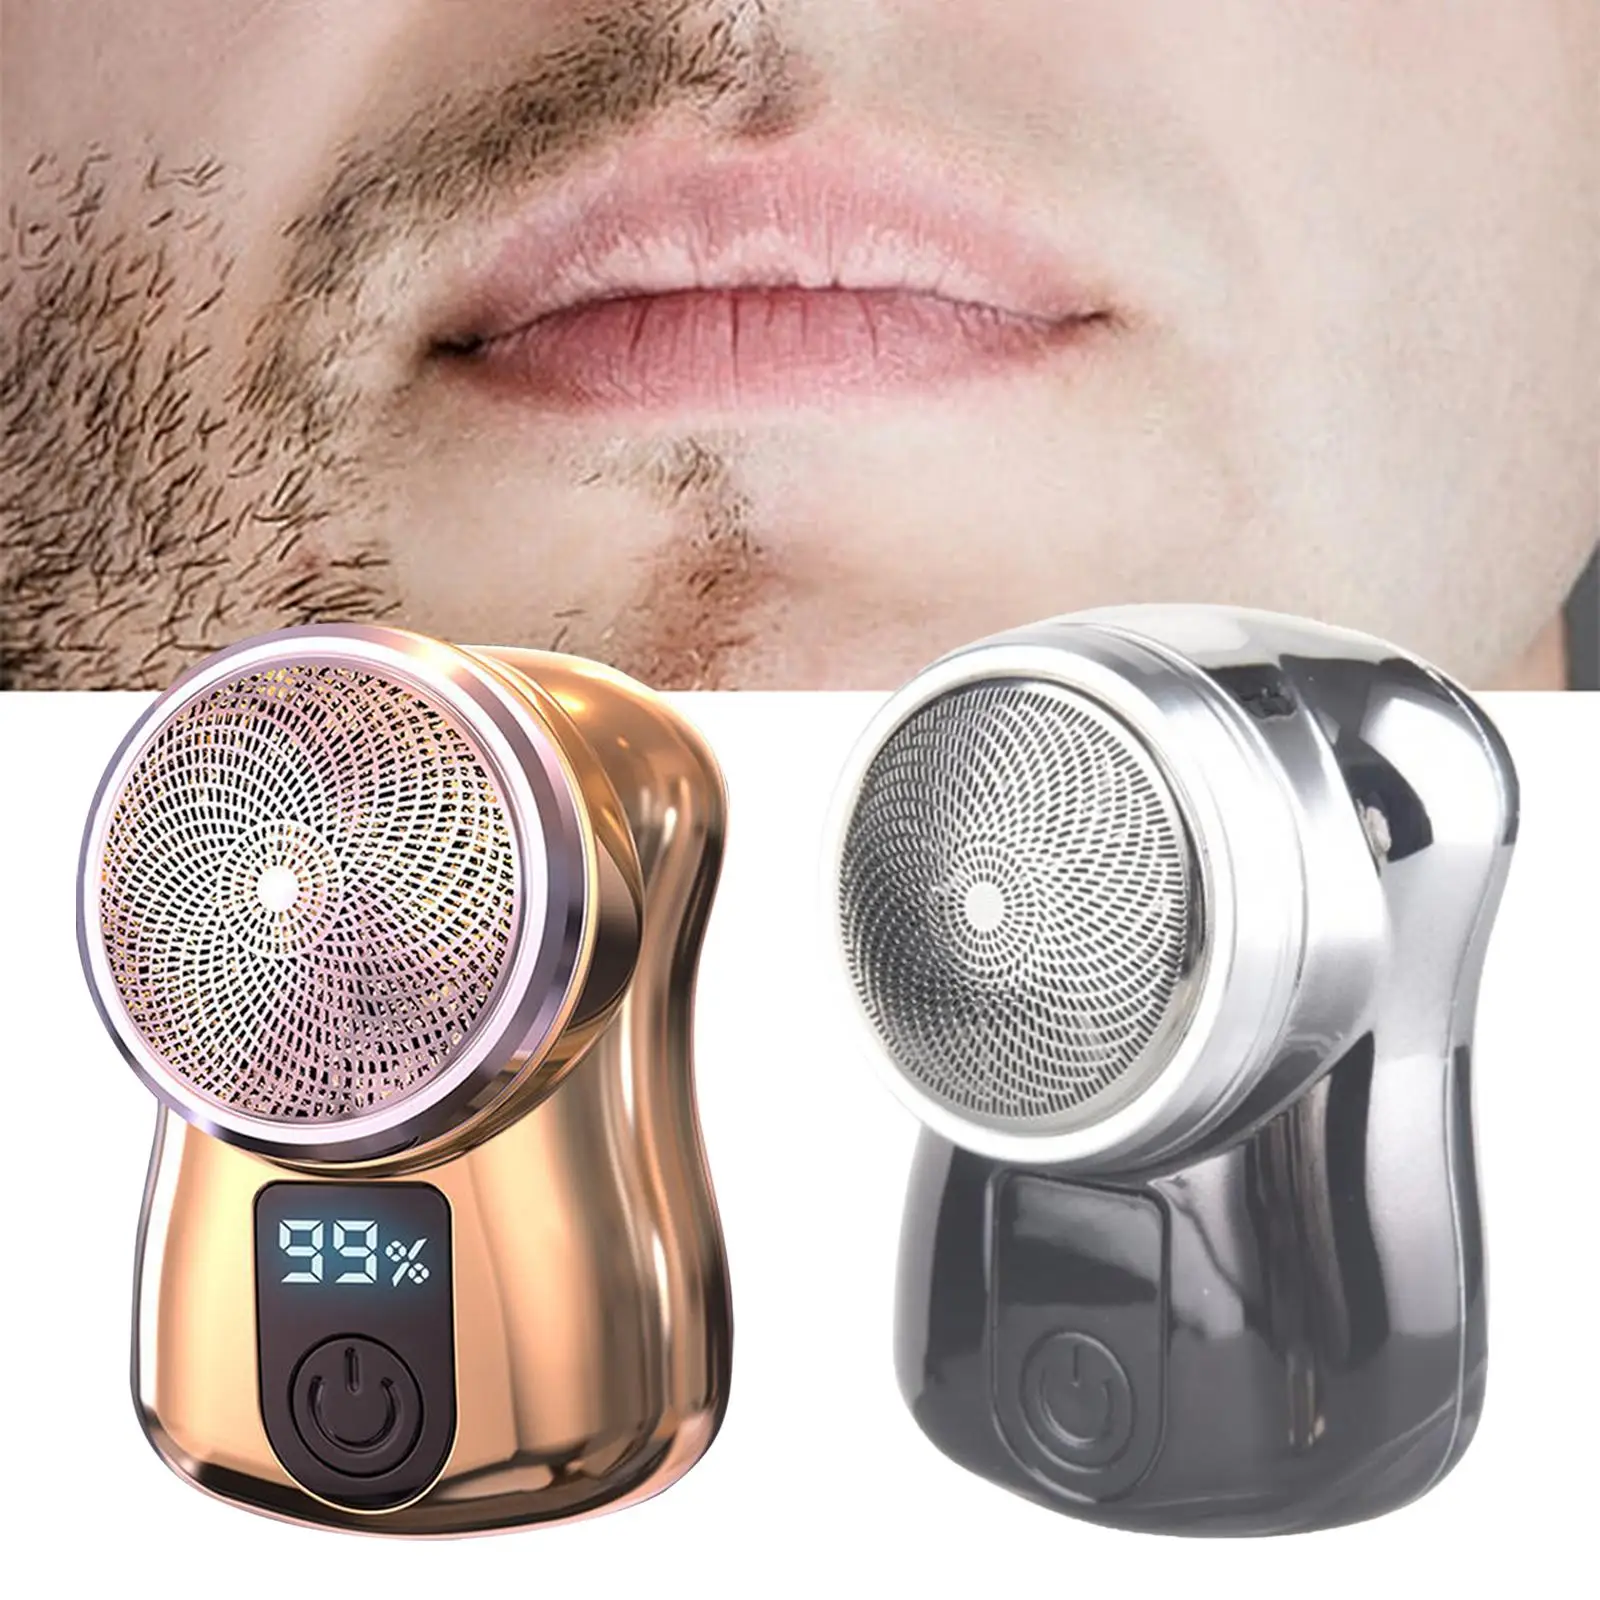 Shaver for Men Washable Head Rechargeable for Home Car Travel Father`s Day Gifts Digital Display Pocket Size Shaving Beard Razor